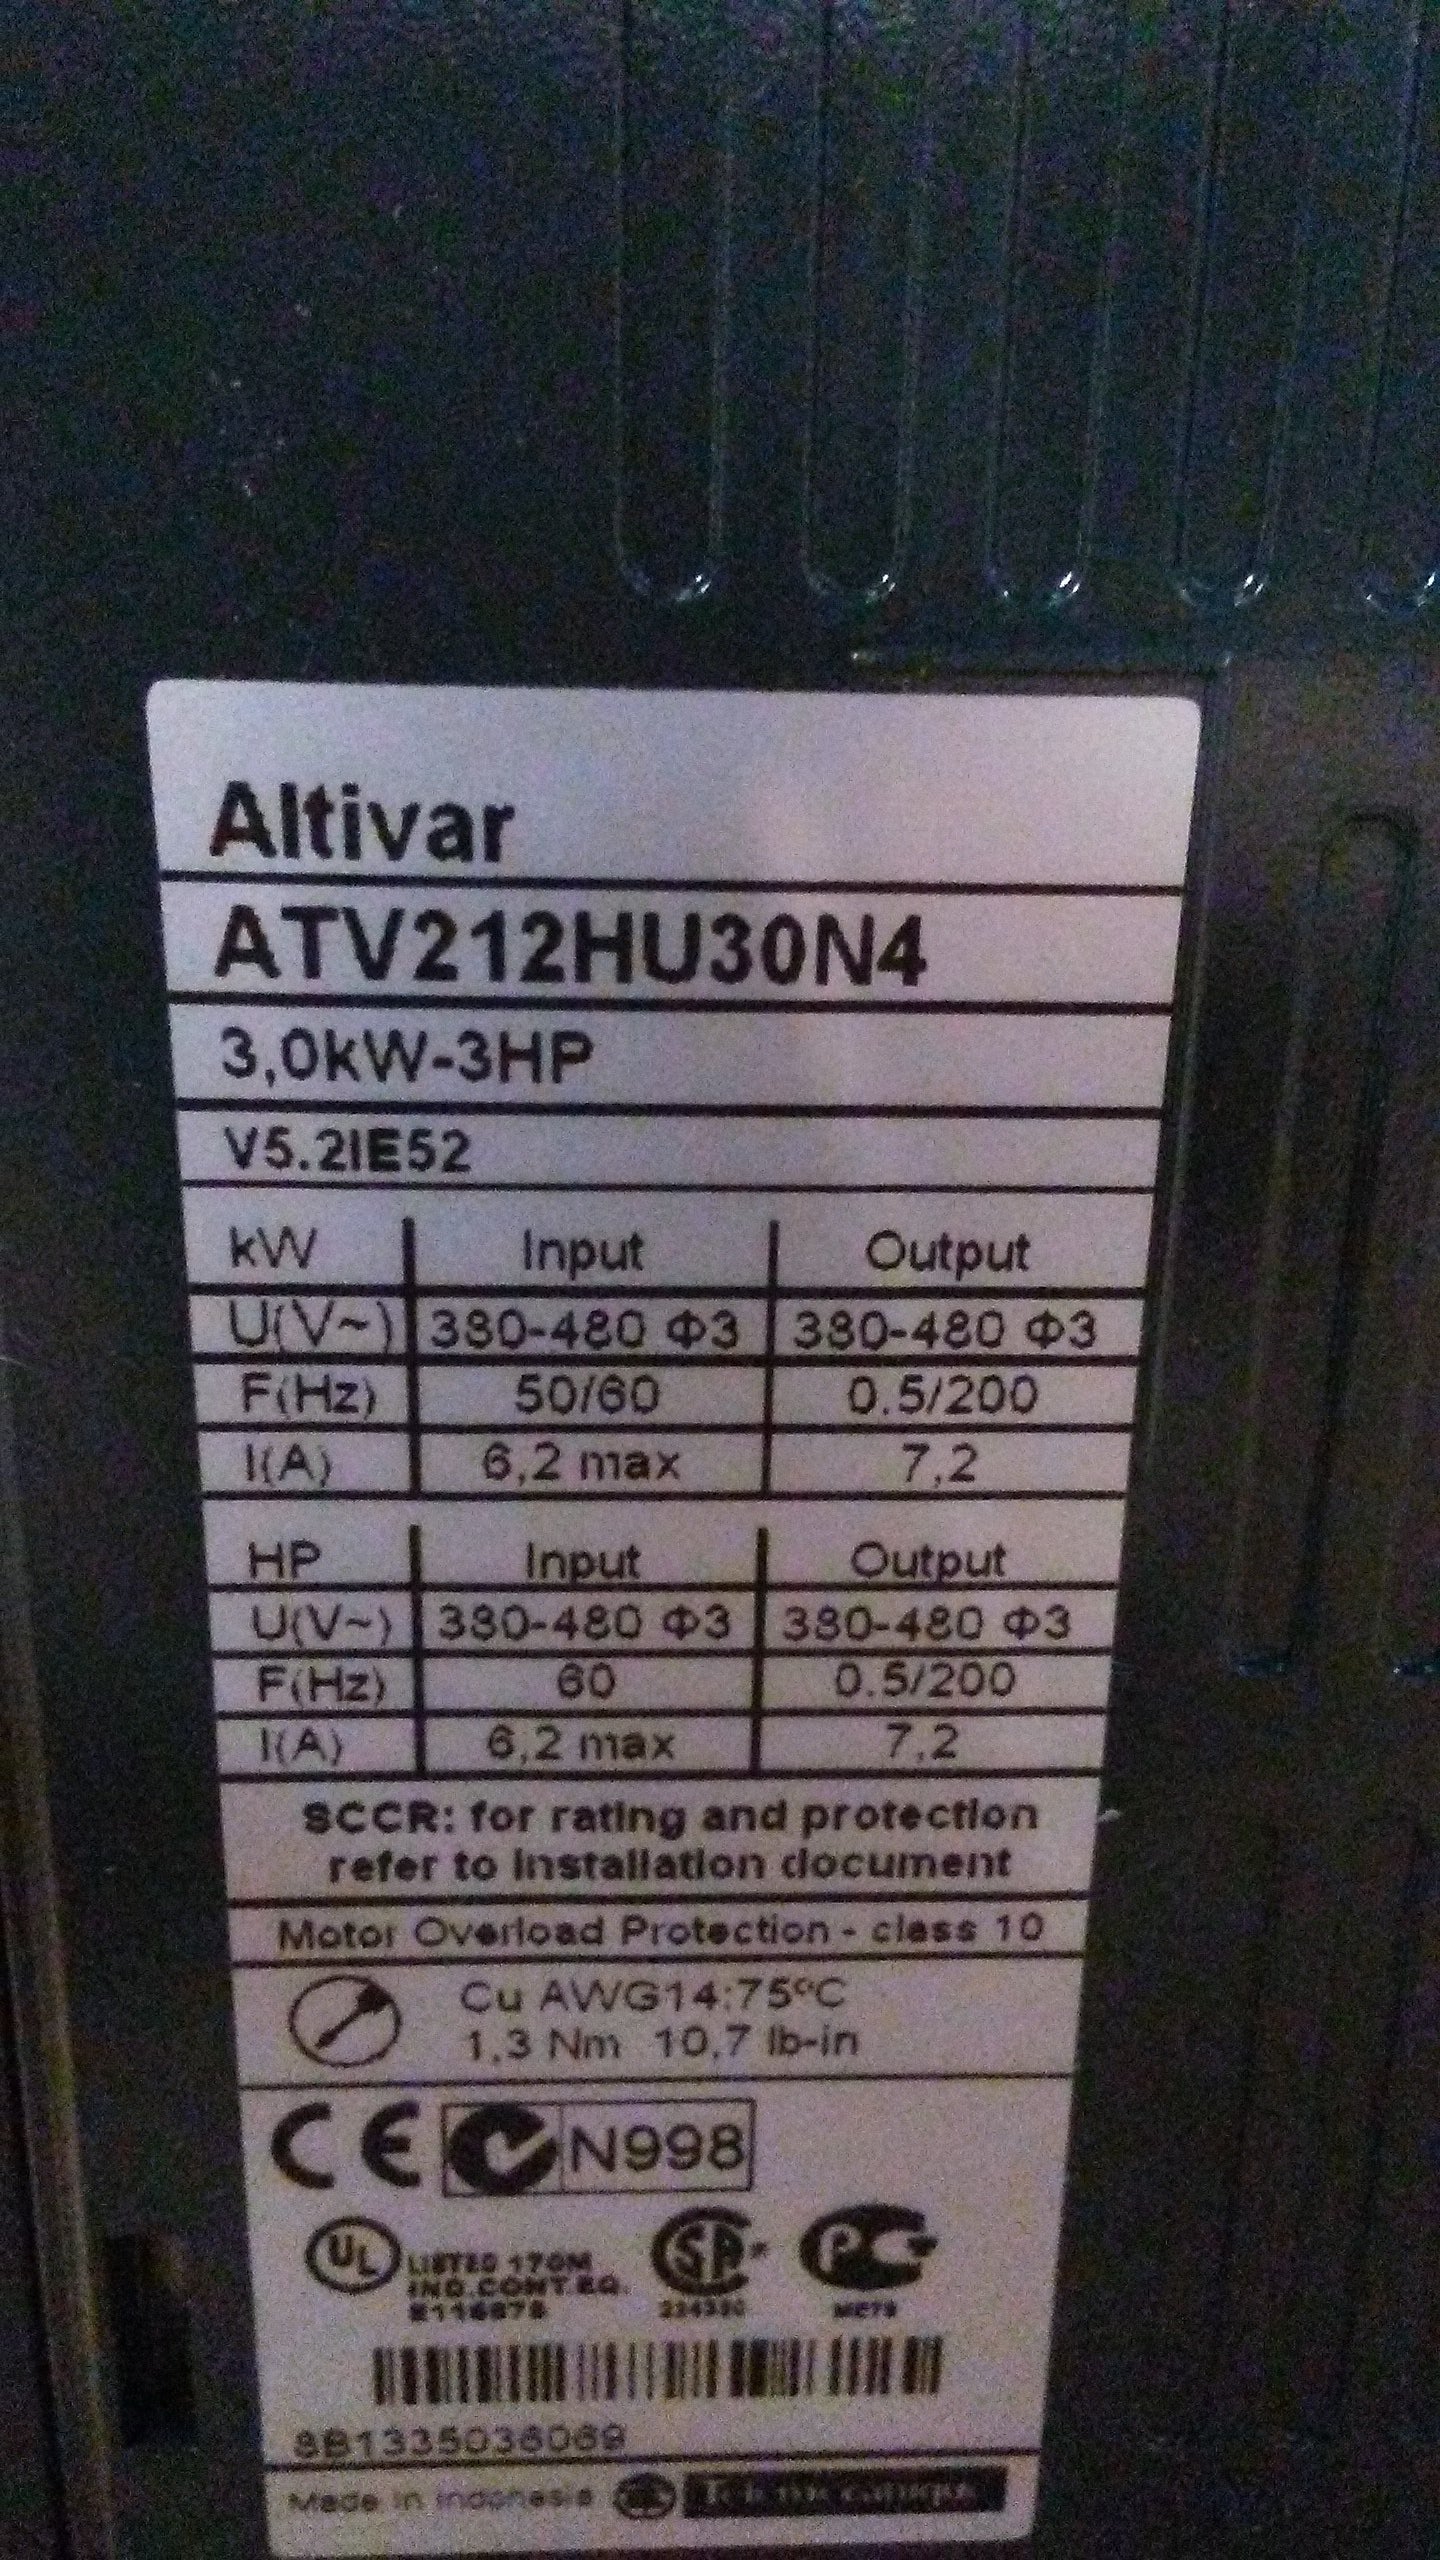 AC VARIABLE FREQUENCY DRIVE,380-480VAC,3-PHASE,3HP